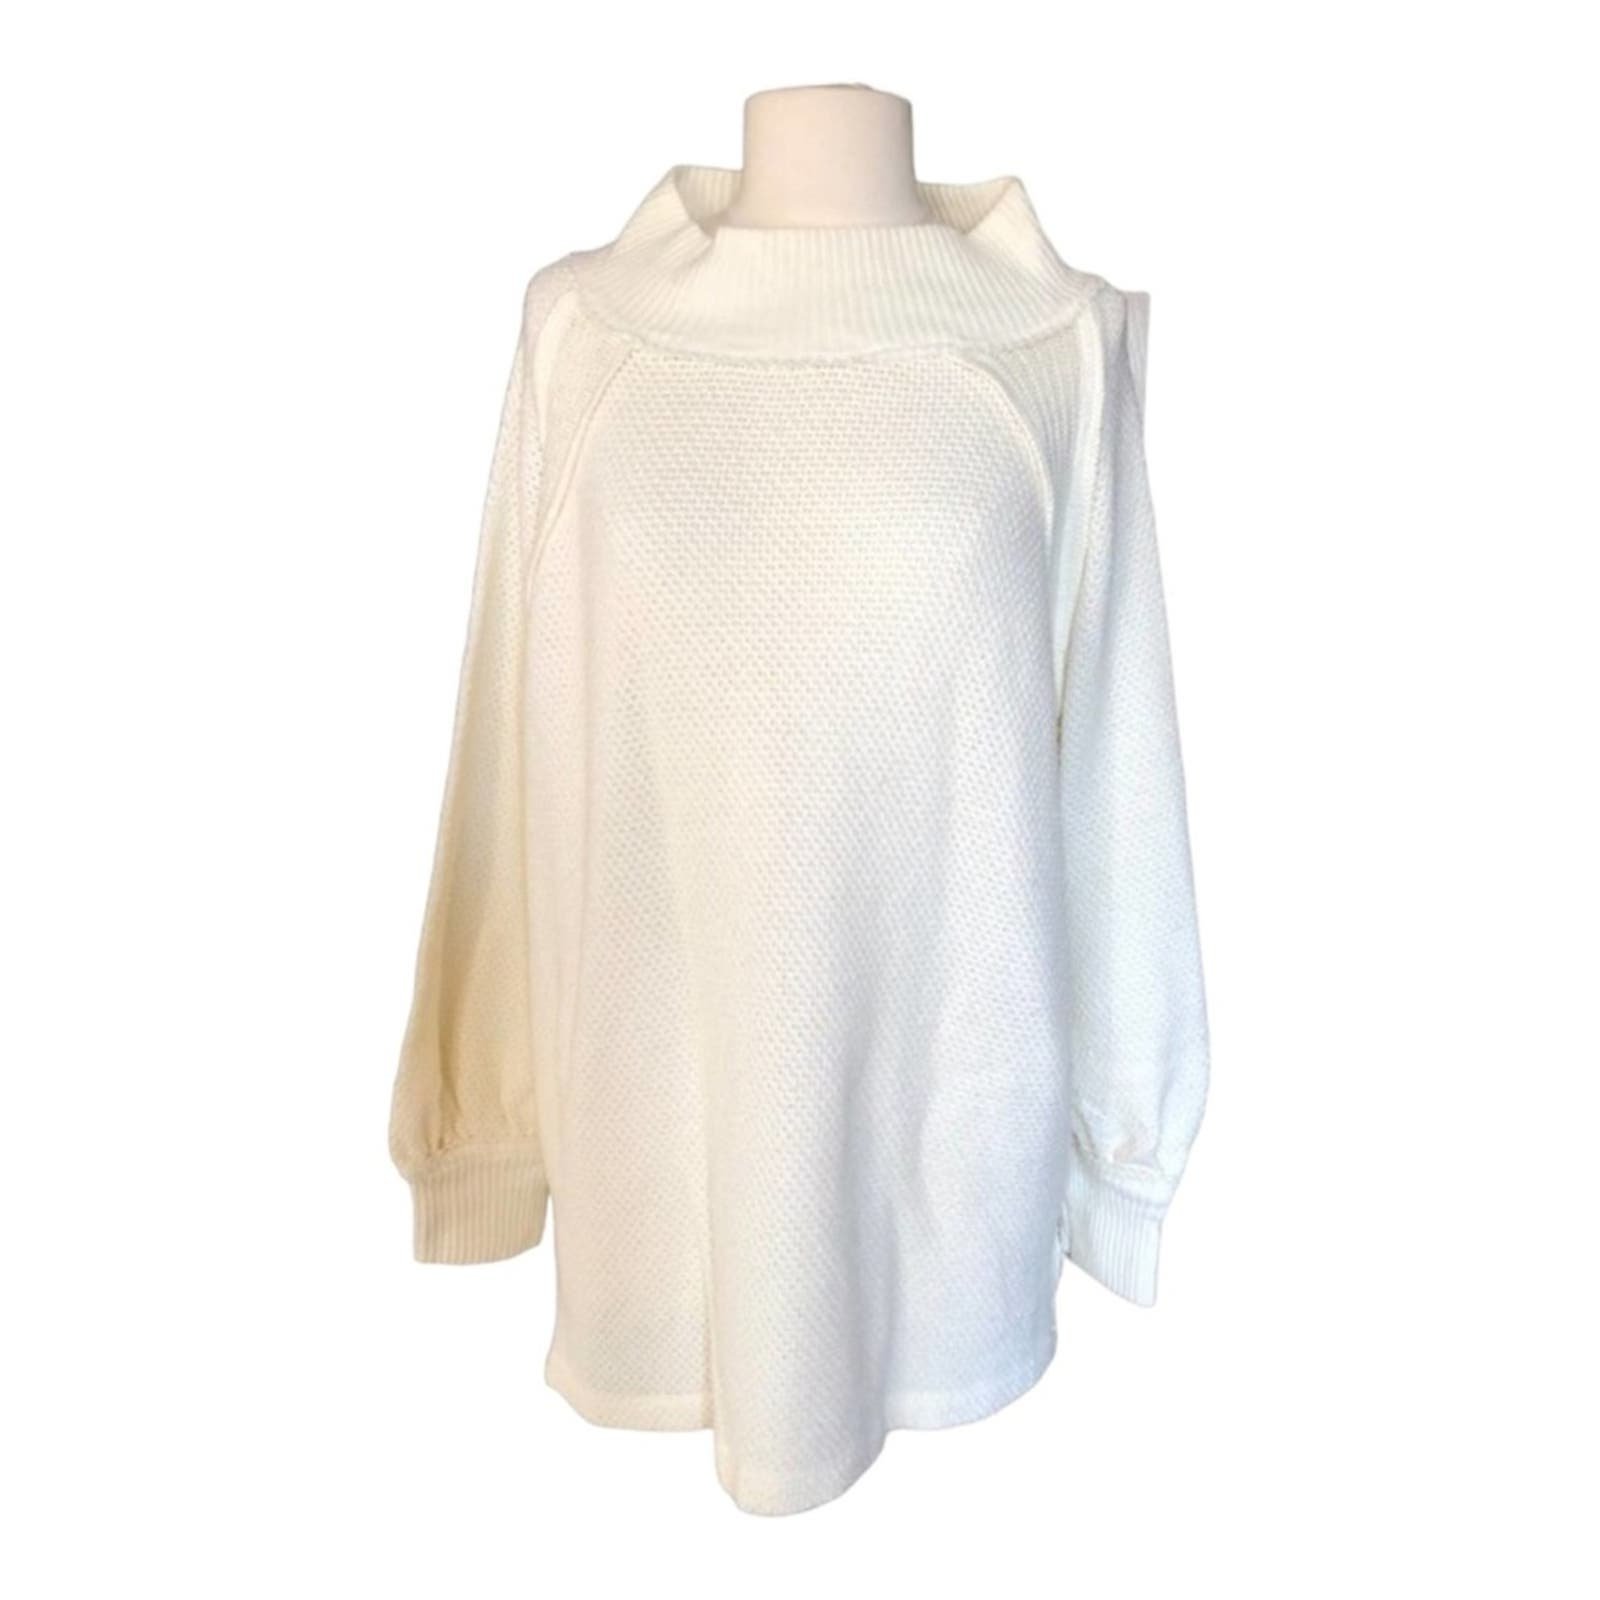 large discount Free People NWT She’s A Keeper Ribbed Funnel Neck Sweater. Ivory, Extra Small NJwRWE0p9 High Quaity